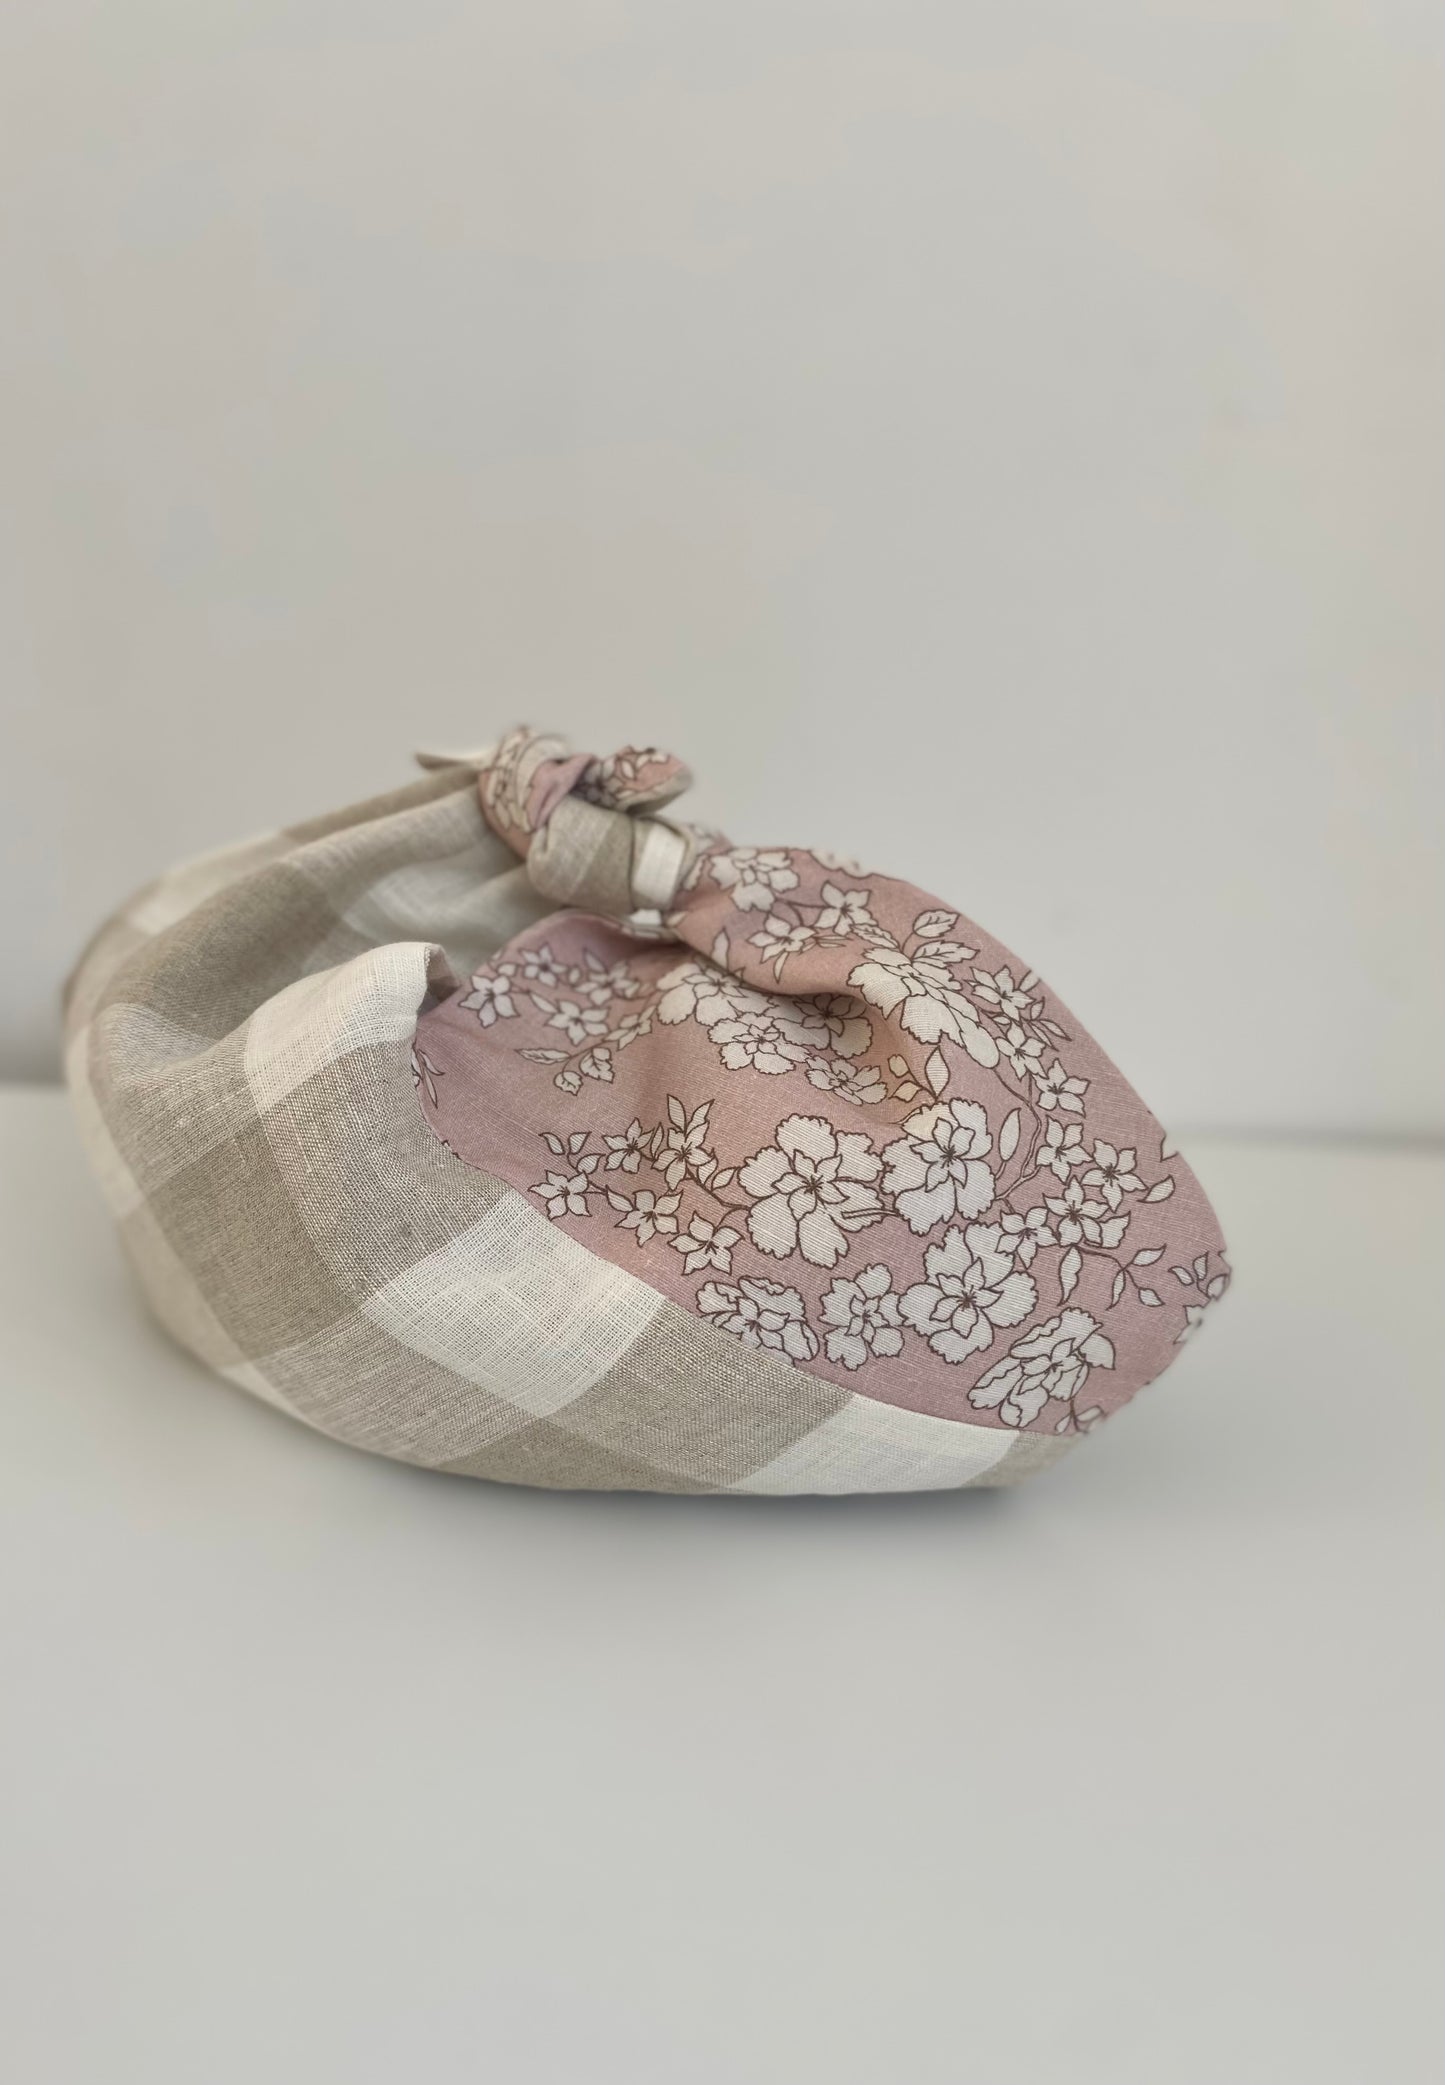 Linen Azuma Bag with lining Floral Pattern in Dusty Pink & Natural Check